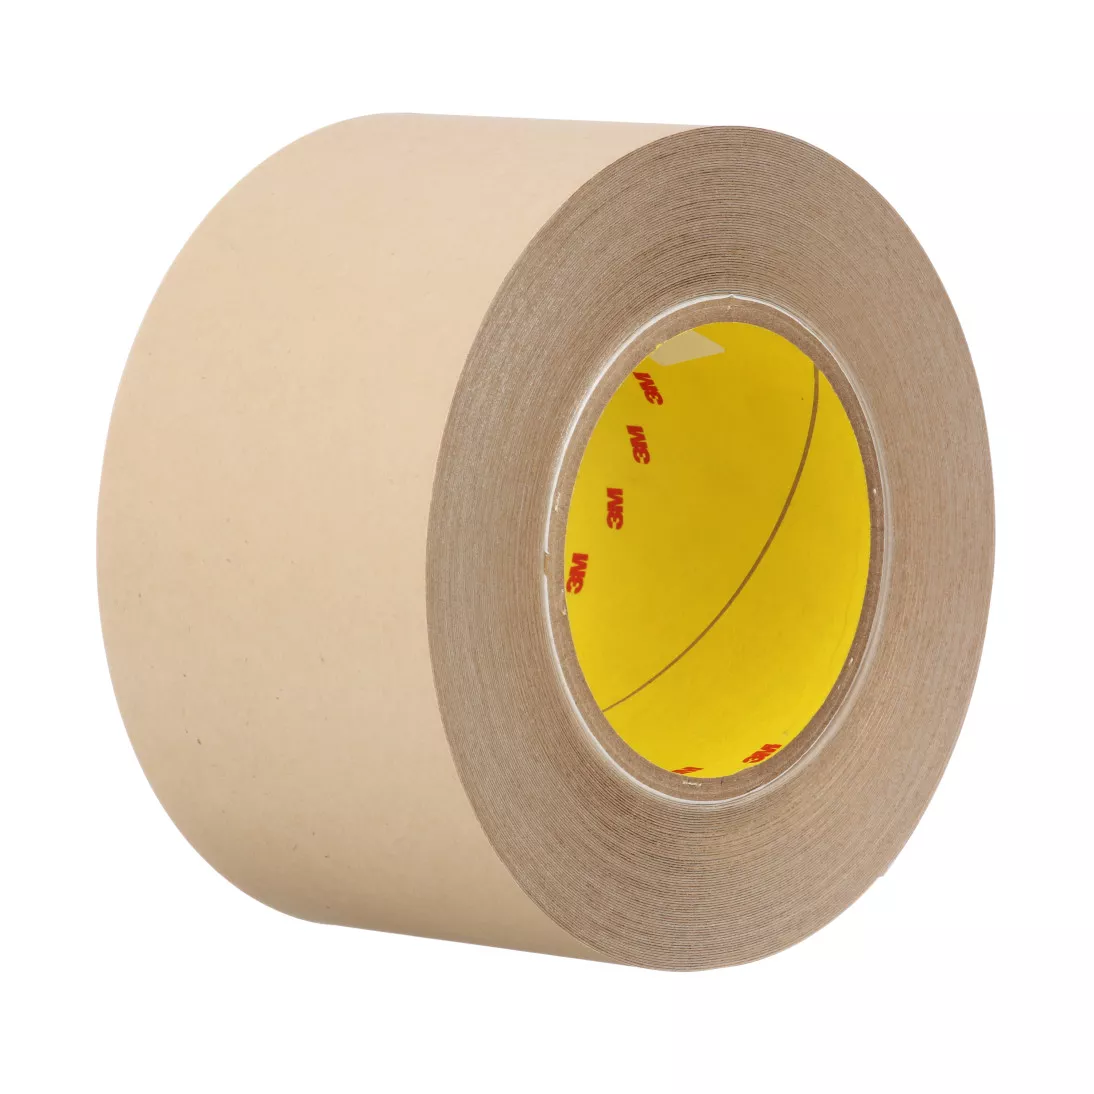 3M™ Sealing Tape 8777, Tan, 3 in x 75 ft, 12 rolls per case, Solid Liner